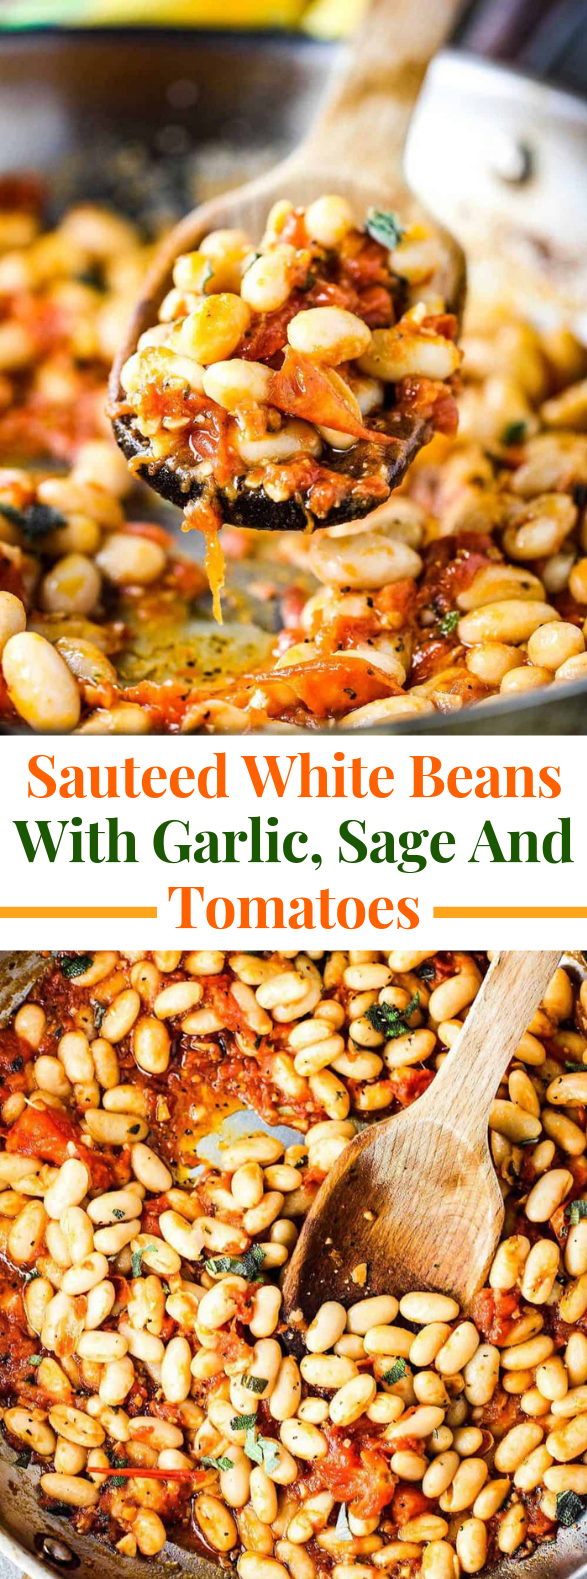 Sauteed White Beans With Garlic, Sage And Tomatoes #vegan #glutenfree